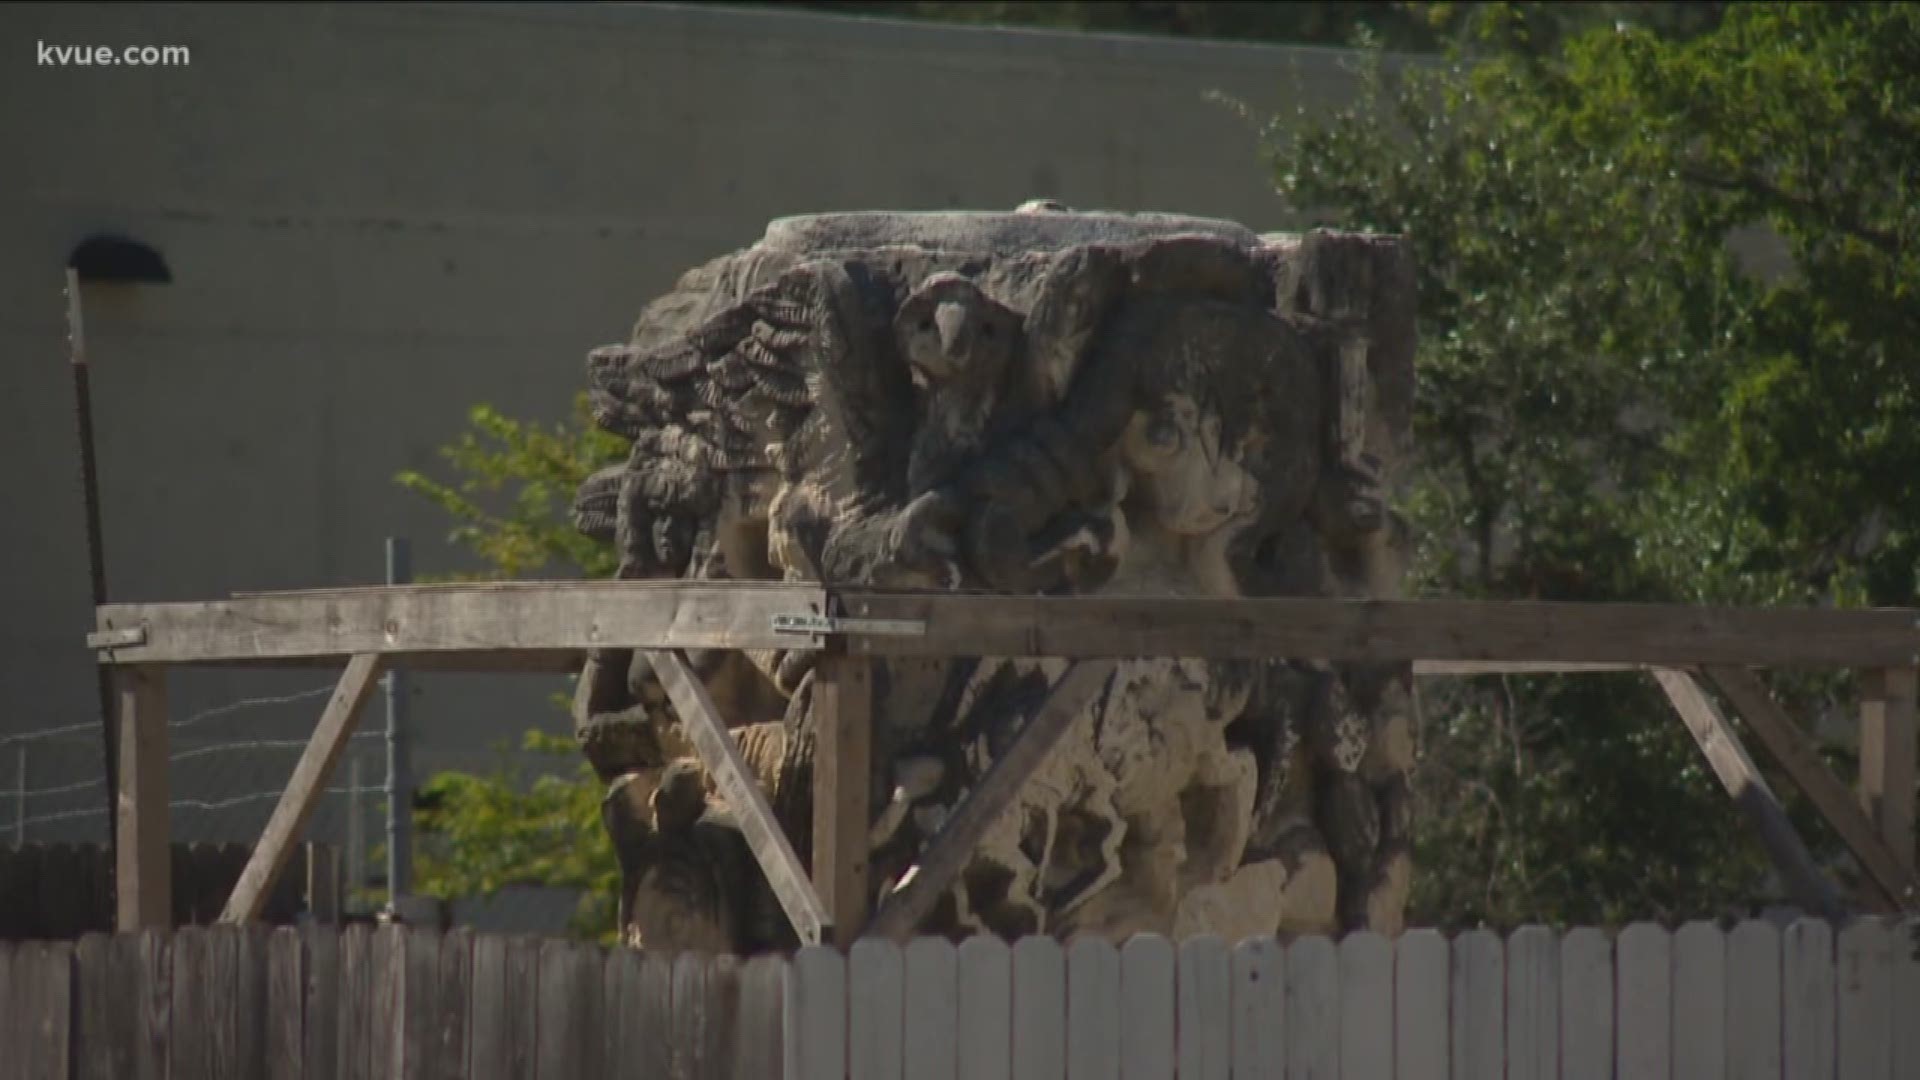 It's a sculpture that's been in Austin for three decades.